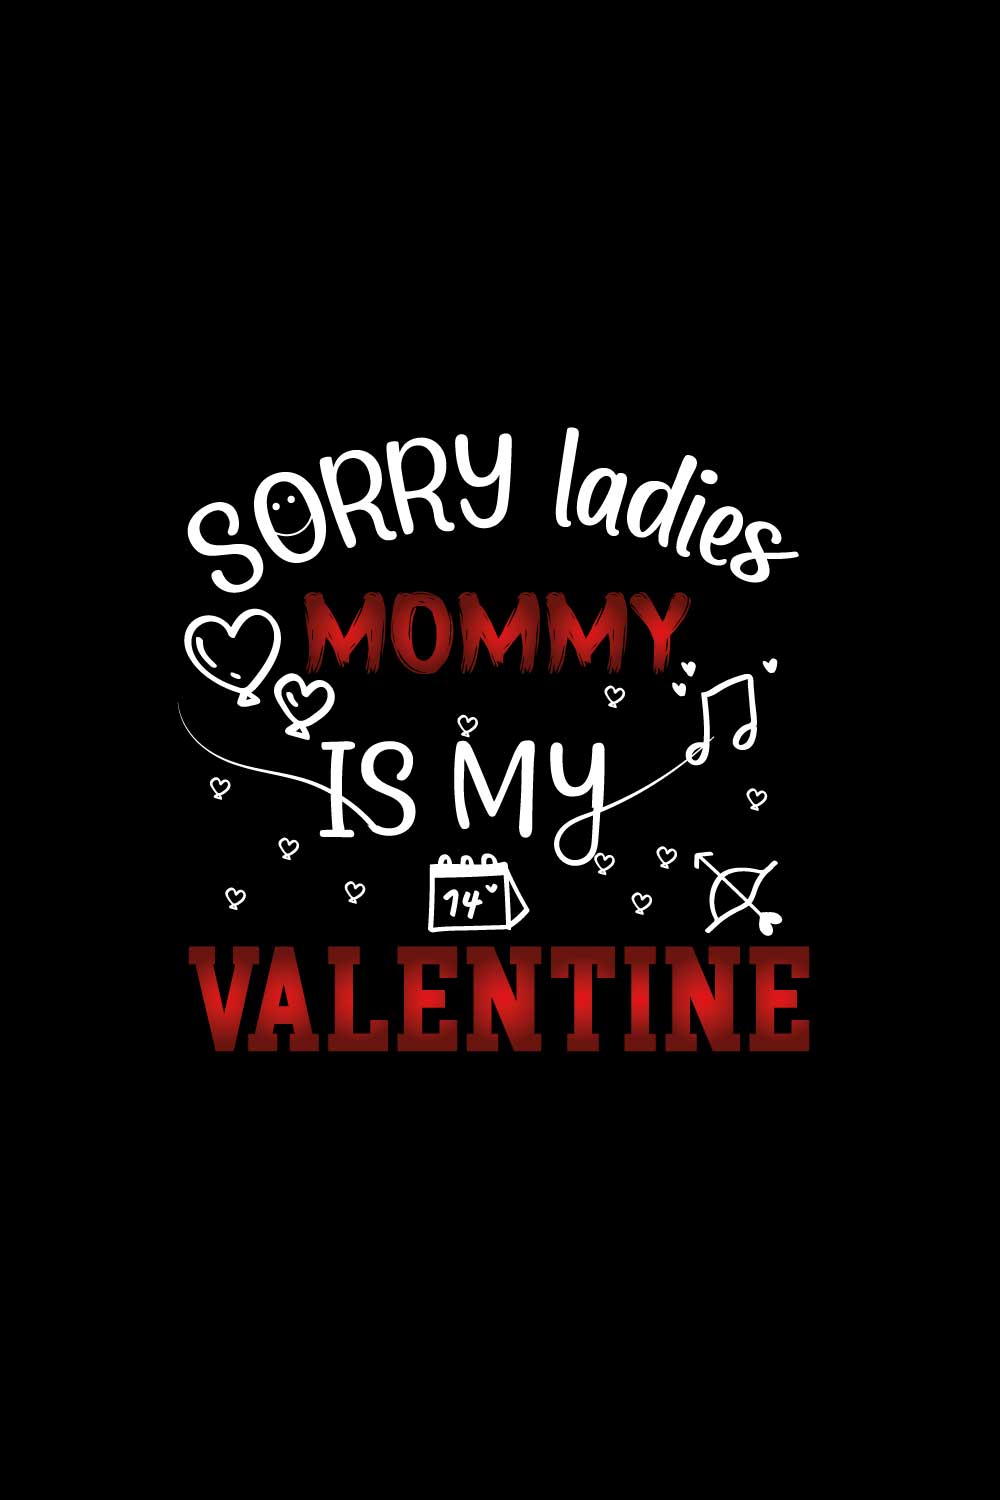 Valentines Day T-Shirt design sorry ladies mommy is my valentine best-selling typography vector t-shirt design fully editable and printable pinterest preview image.